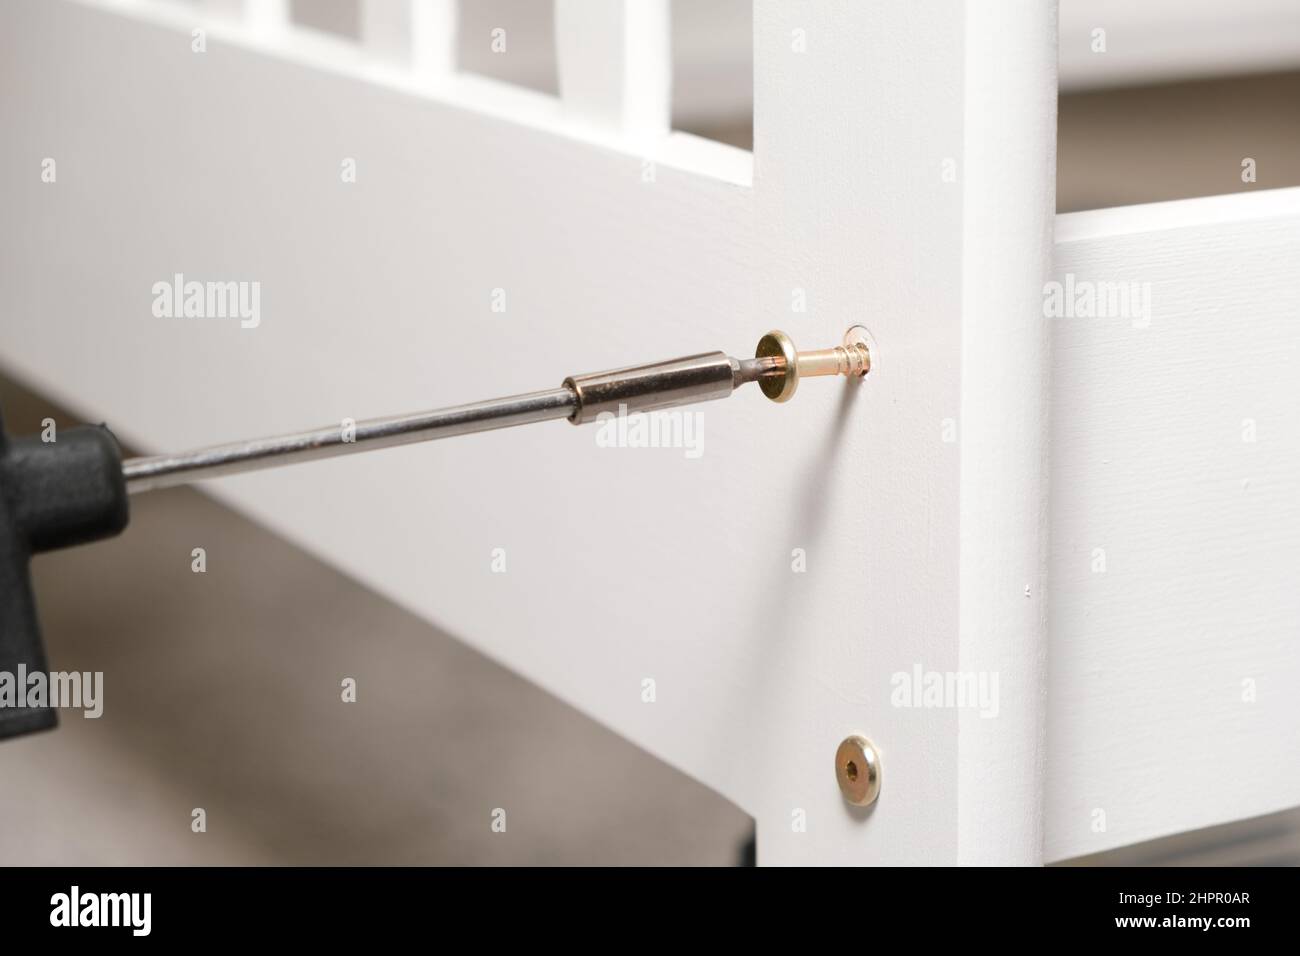 Close-up process of screwing a self-tapping screw into a white wooden bed with a screwdriver. Stock Photo